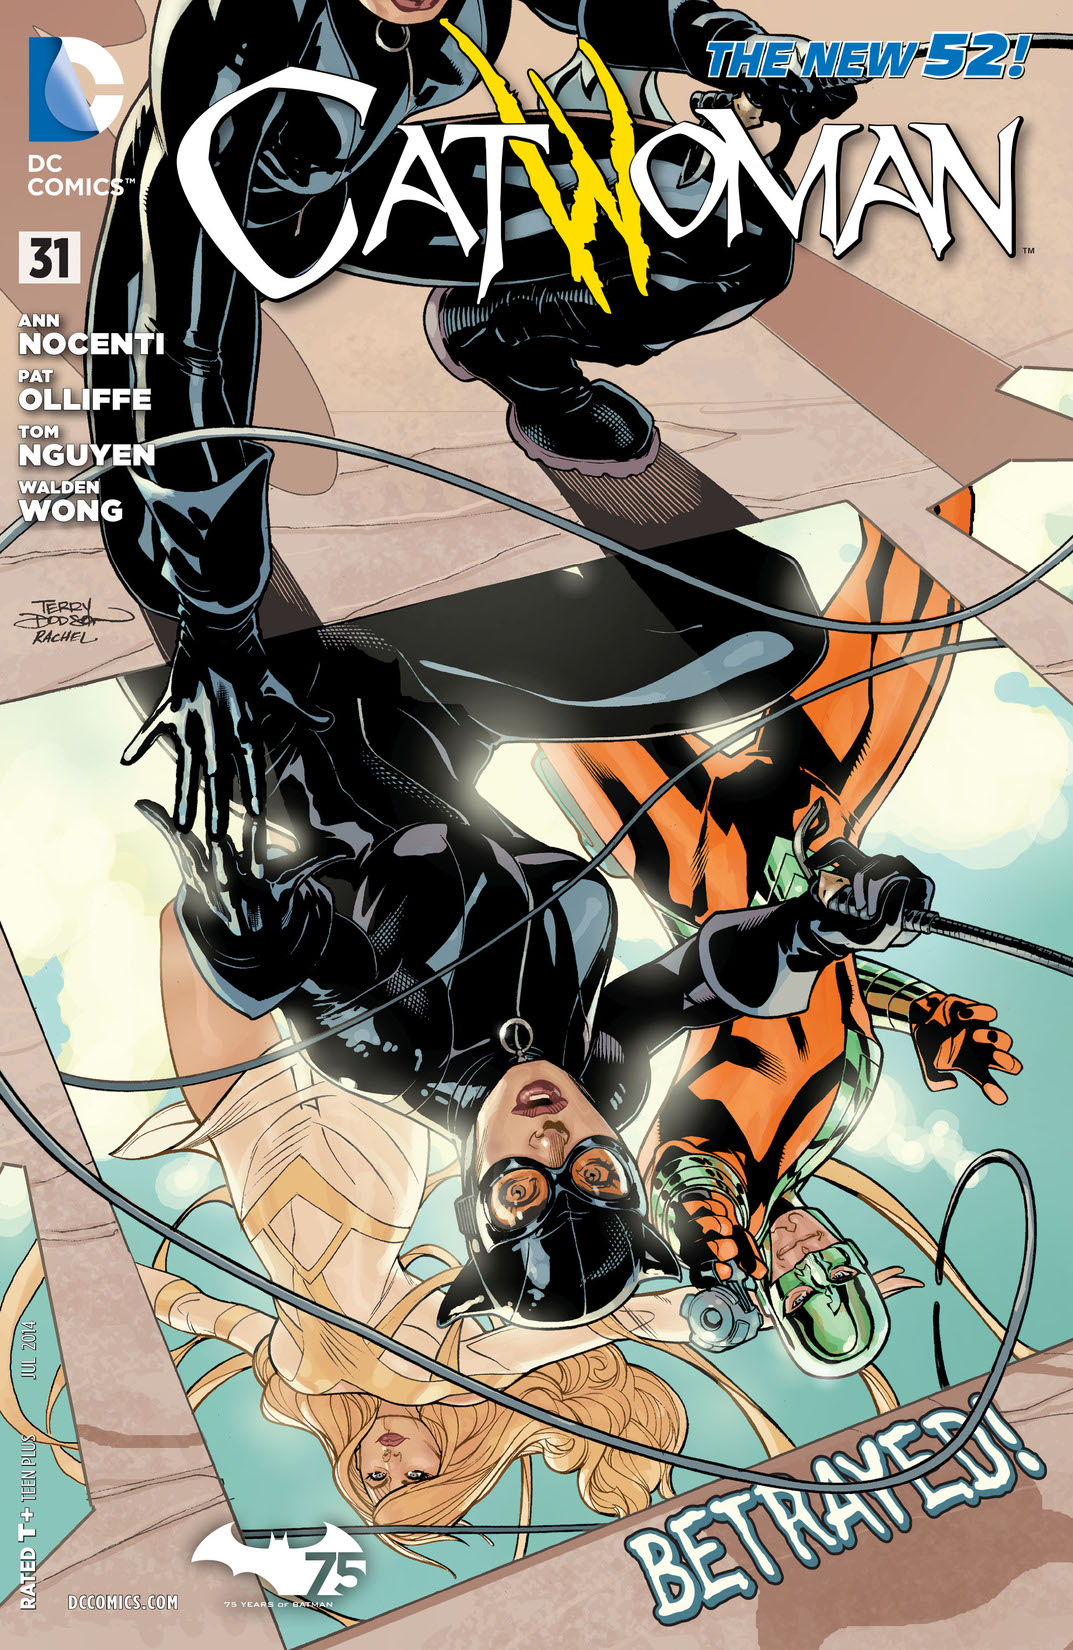 Catwoman (2011-) #31 preview images